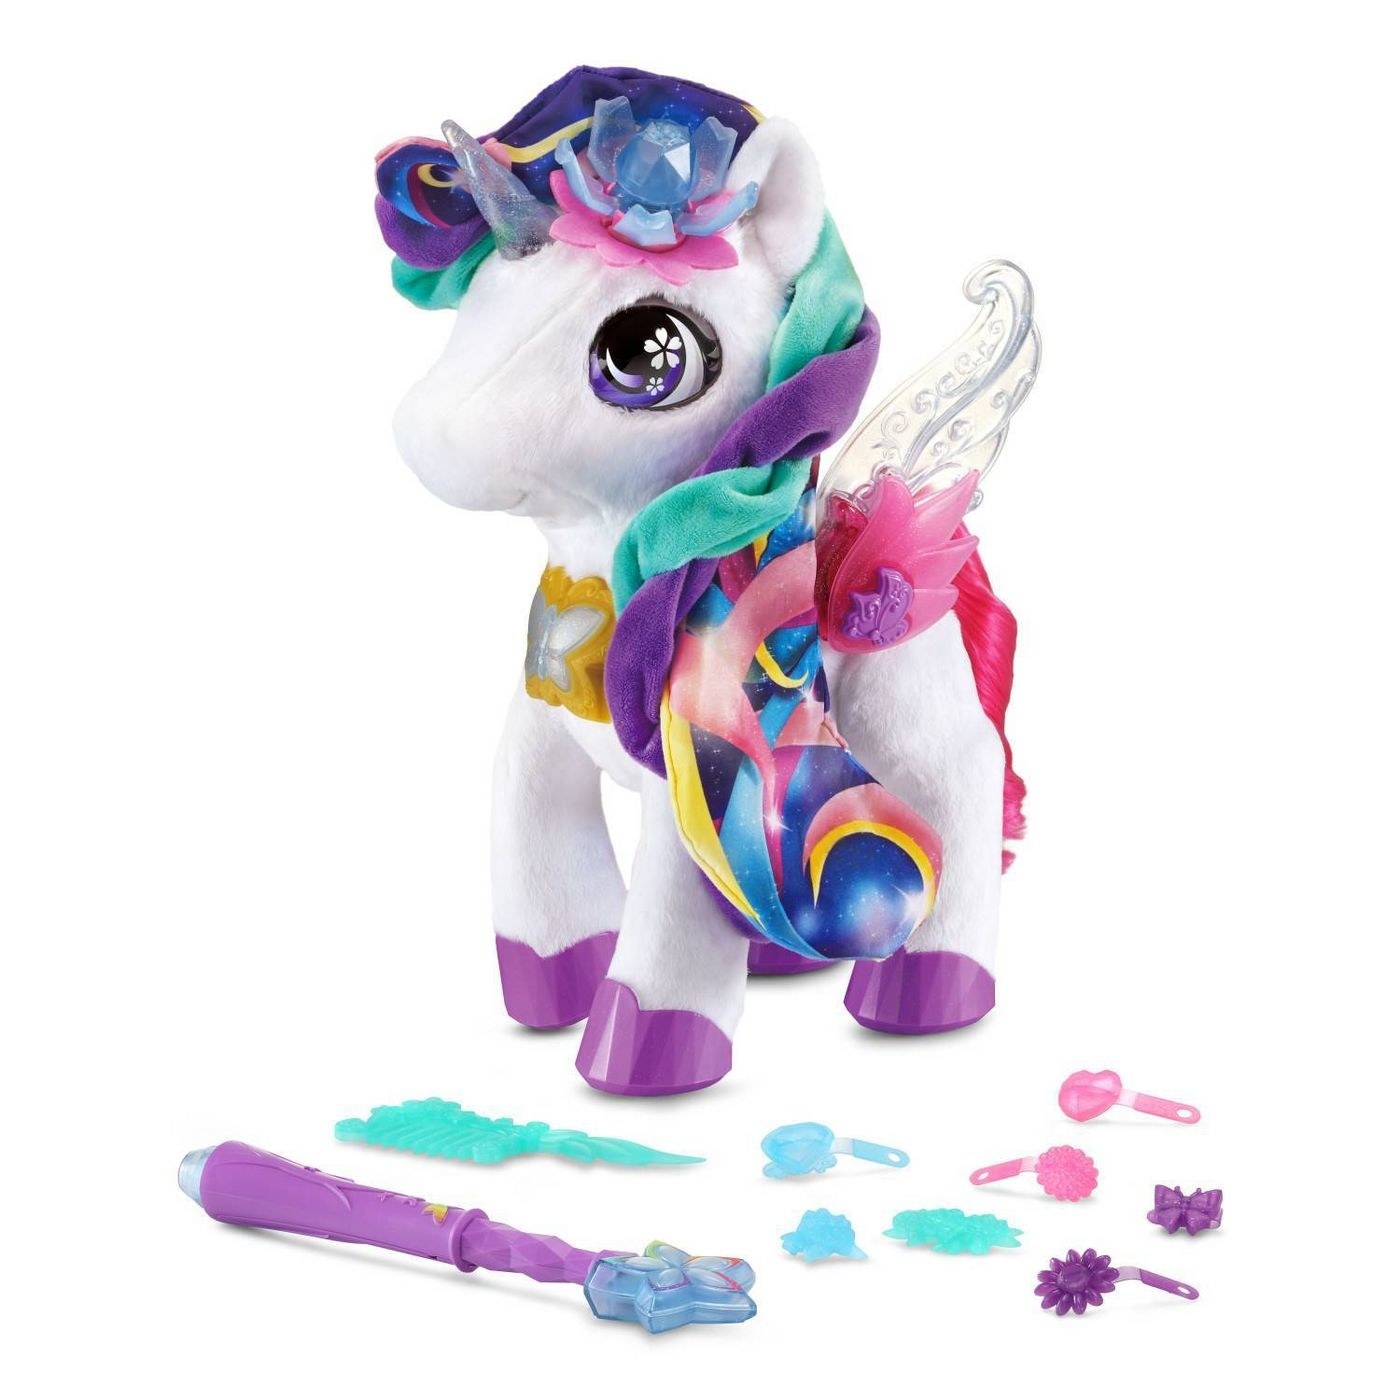 the unicorn and its accessories including a wand and barrettes